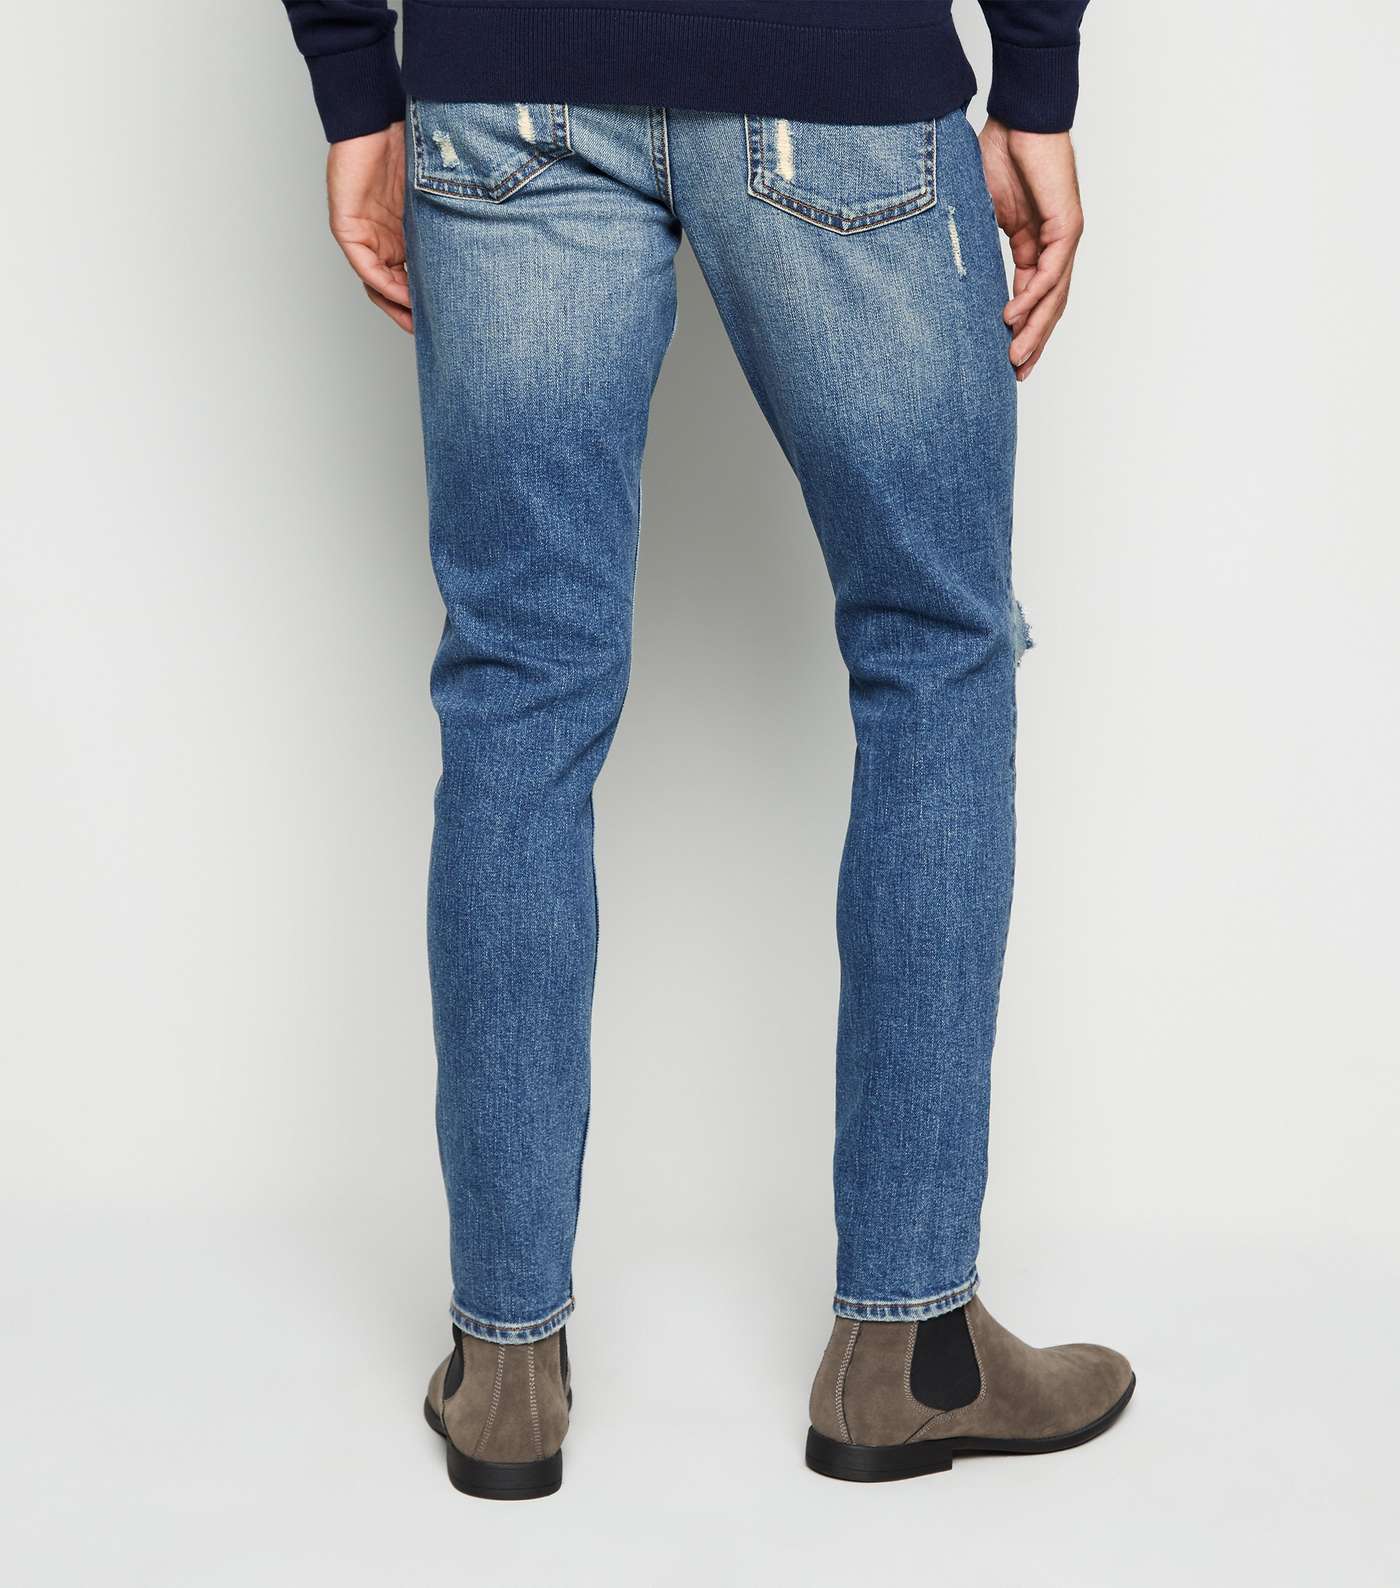 Blue Rinse Wash Ripped Skinny Stretch Jeans Image 3